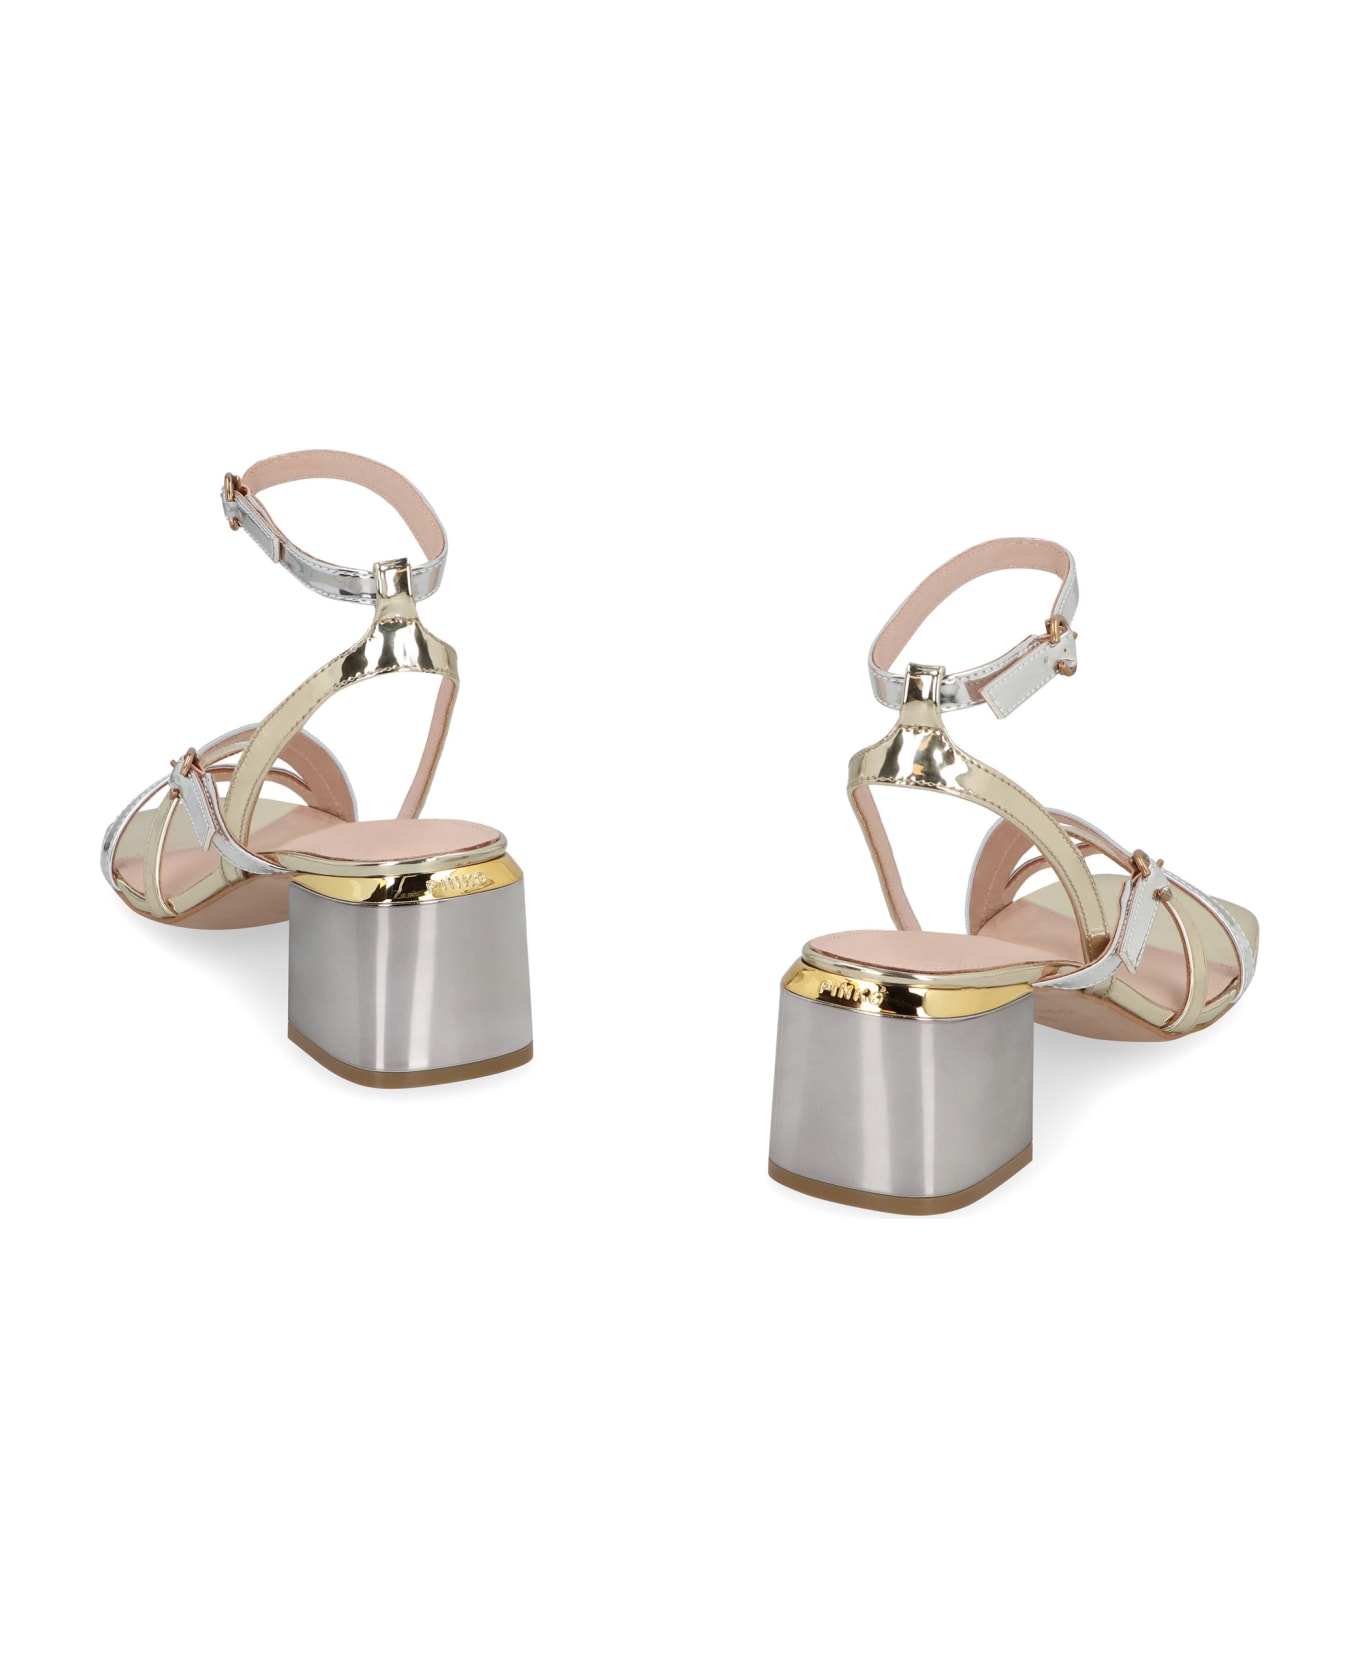 Pinko Patent Leather Sandals - silver